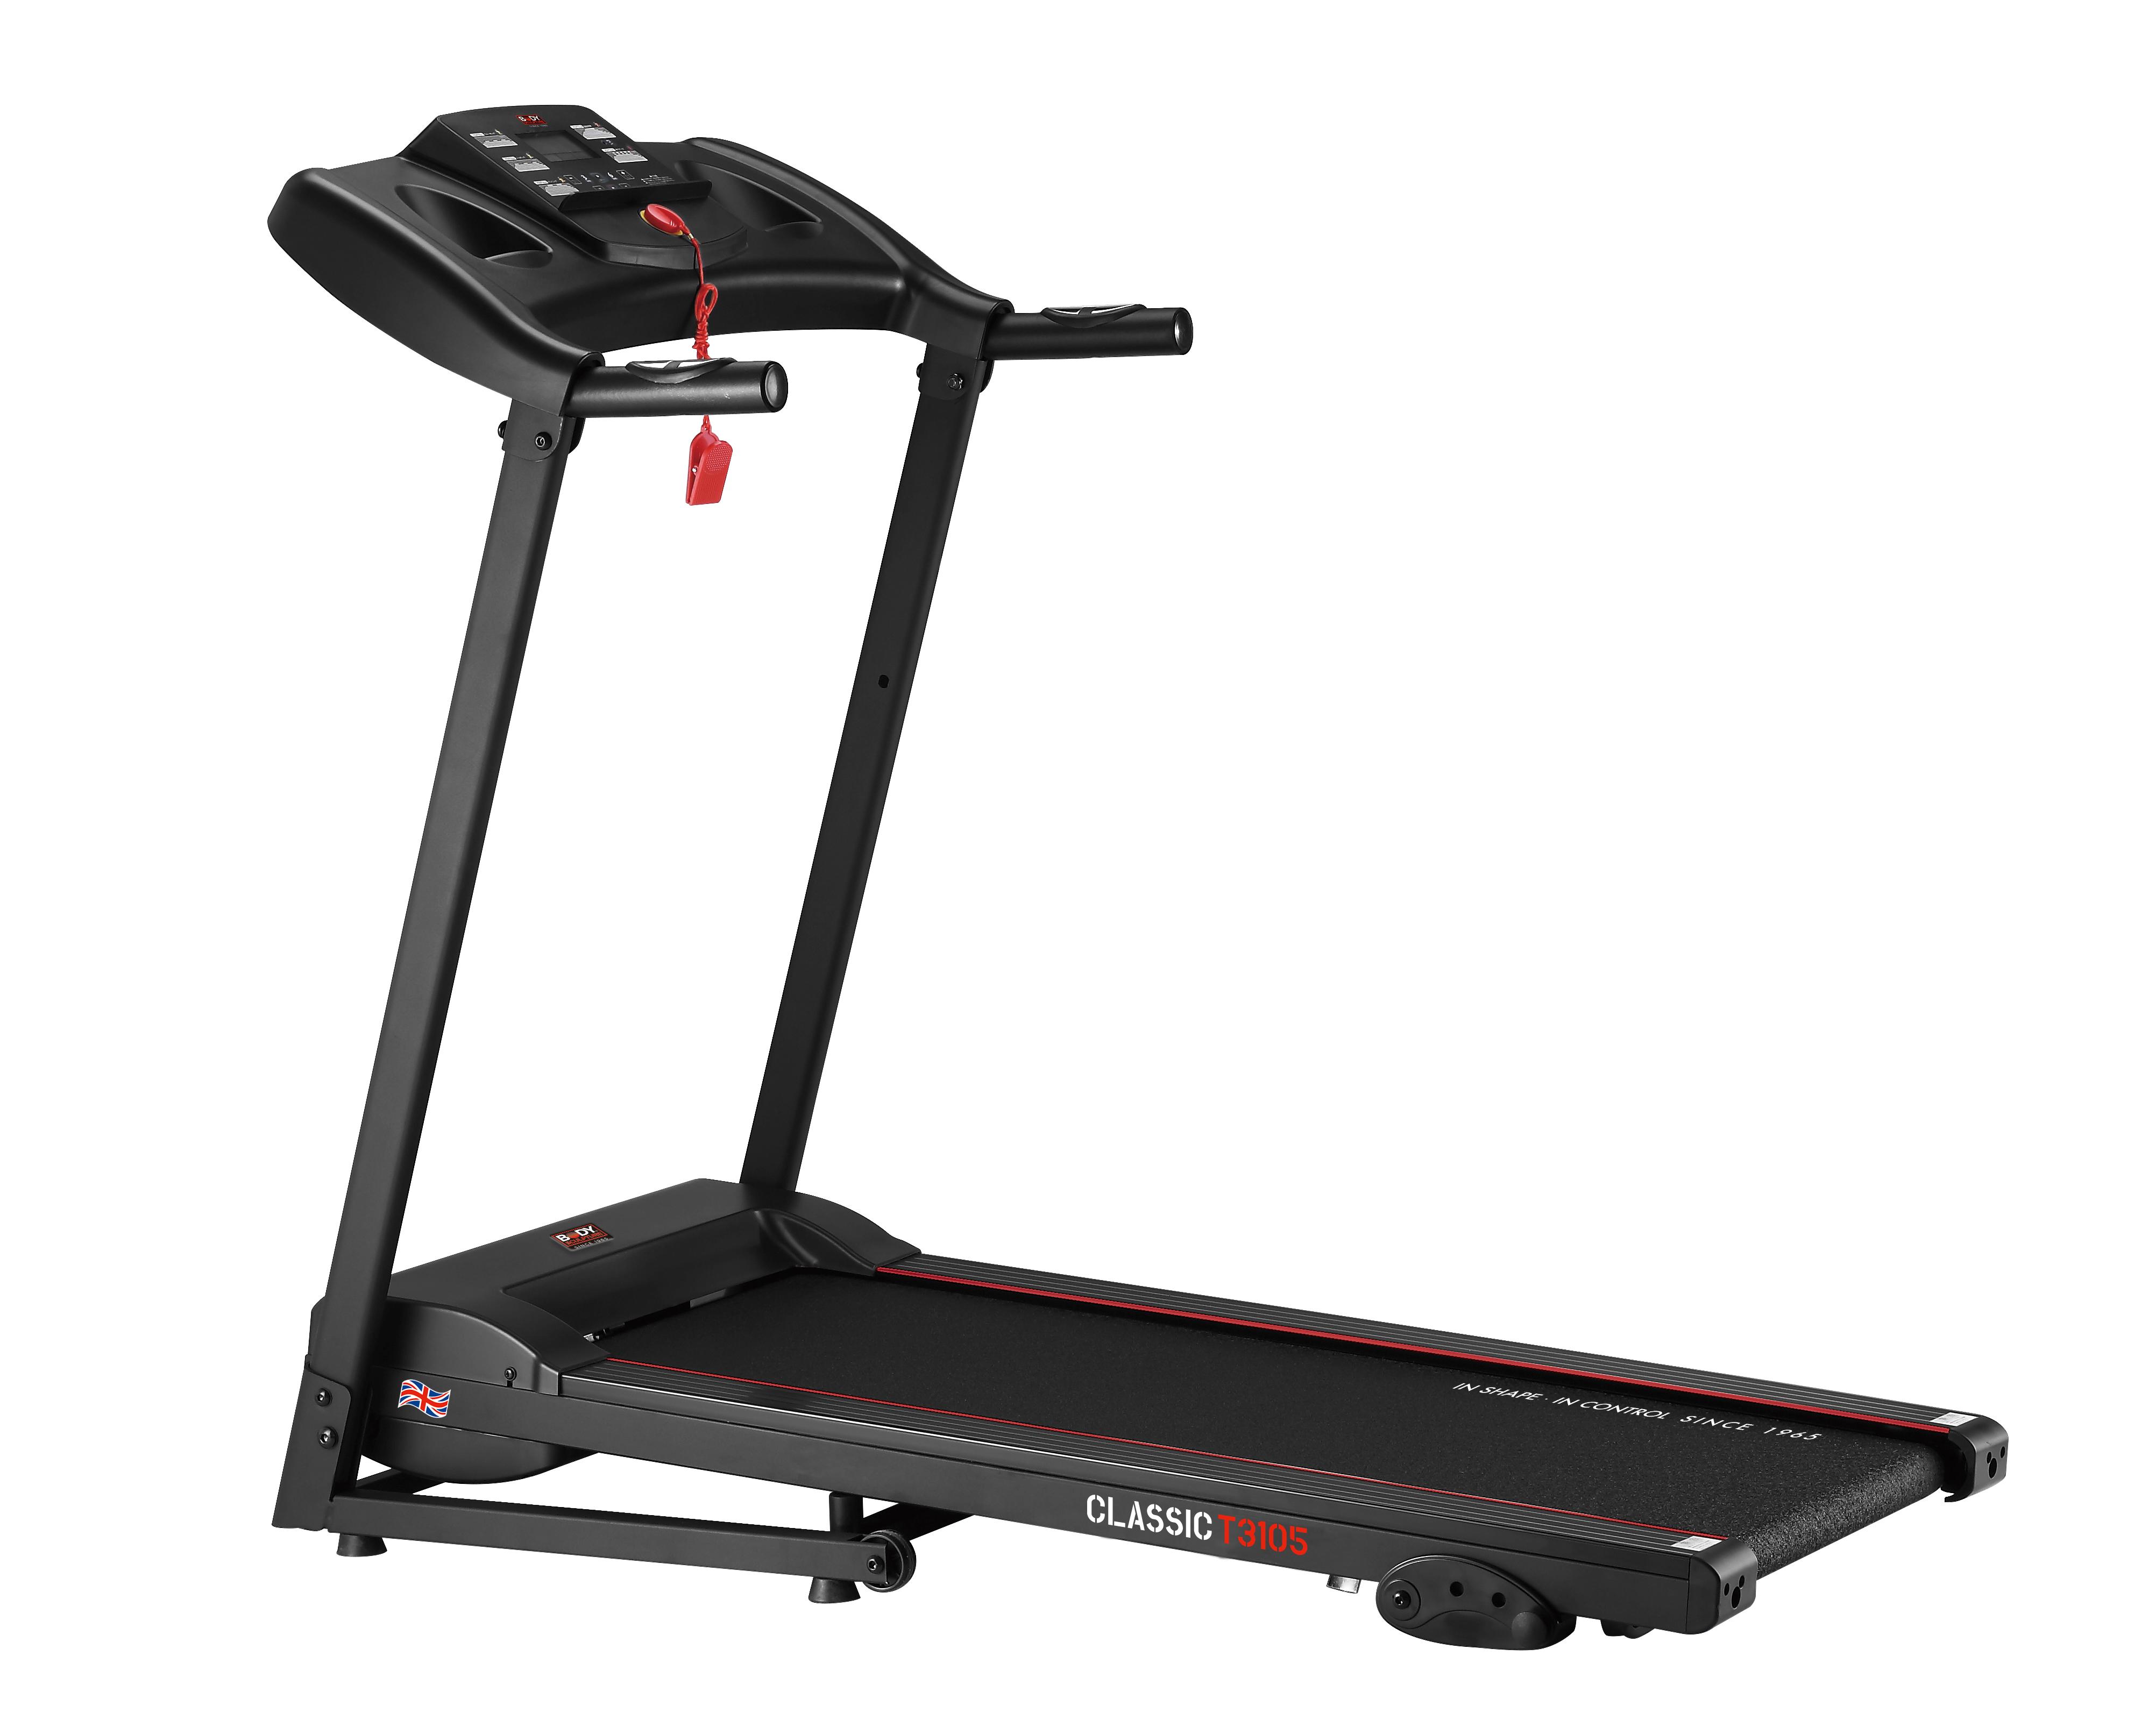 BT3105 Motorised Treadmill with 3 Section Manual Incline